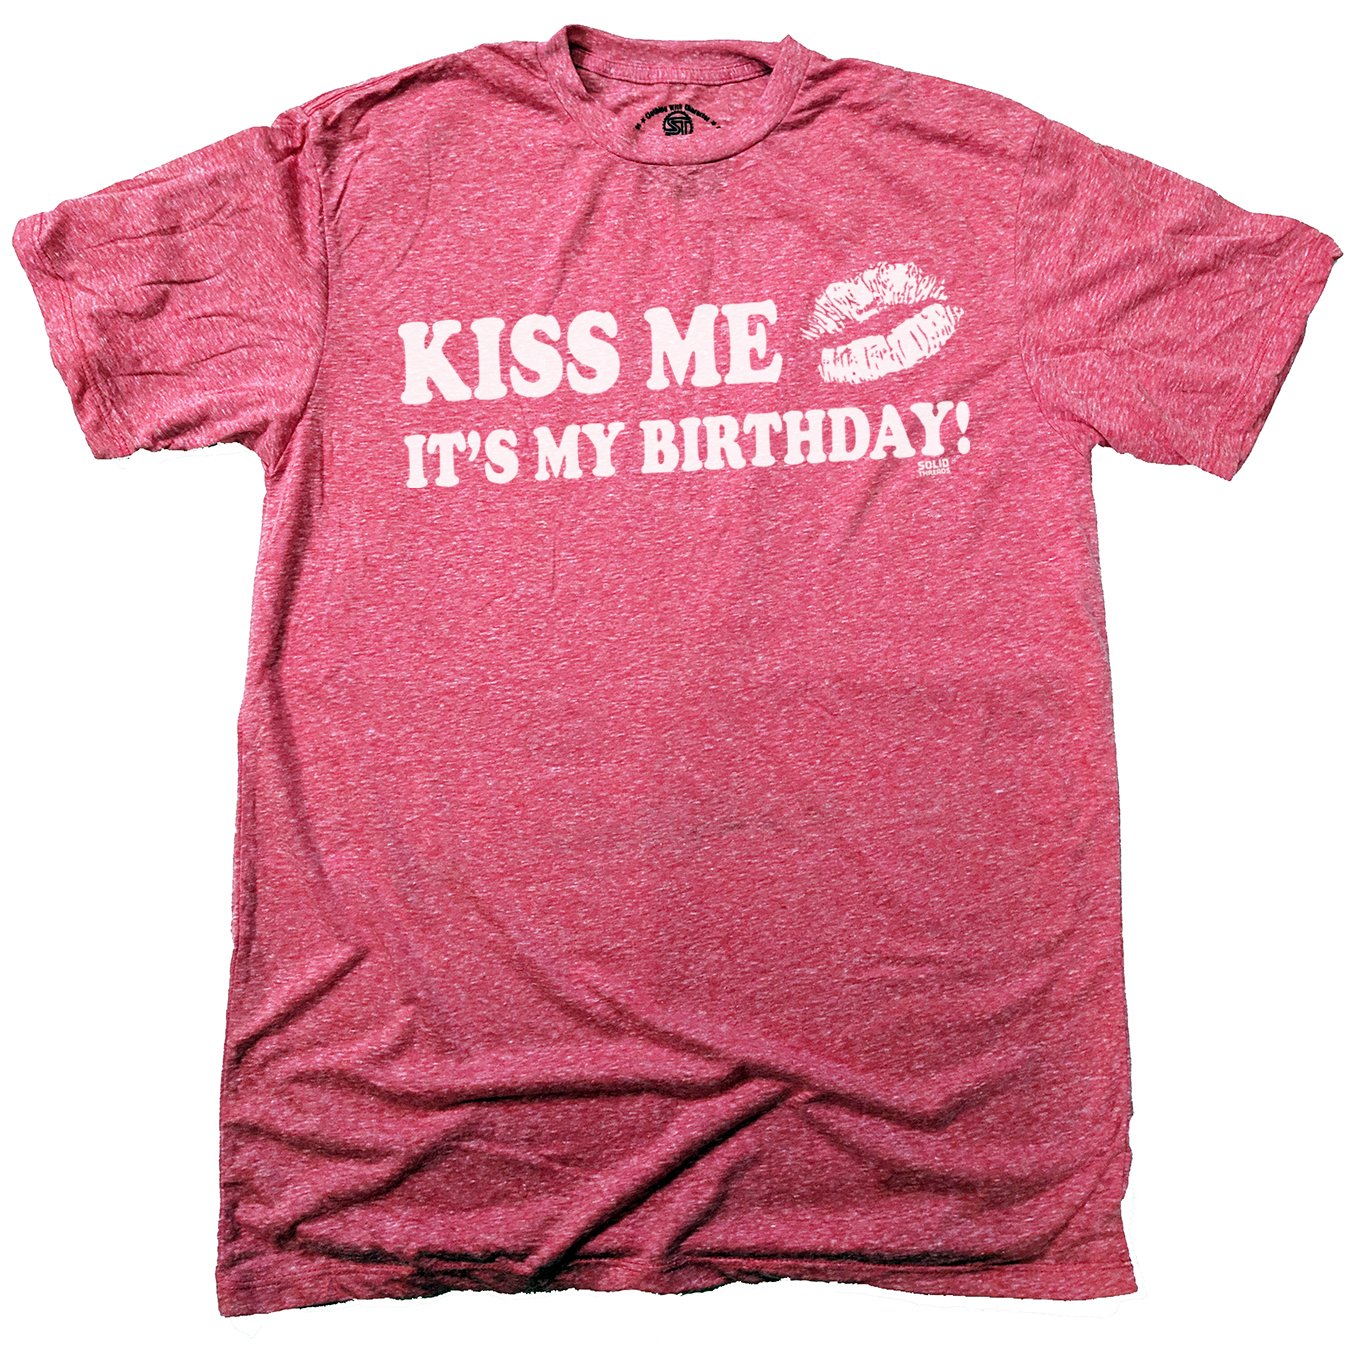 Men's Kiss Me It's My Birthday Vintage Inspired T-shirt | Cool Retro Funny Celebration Graphic Tee | Solid Threads